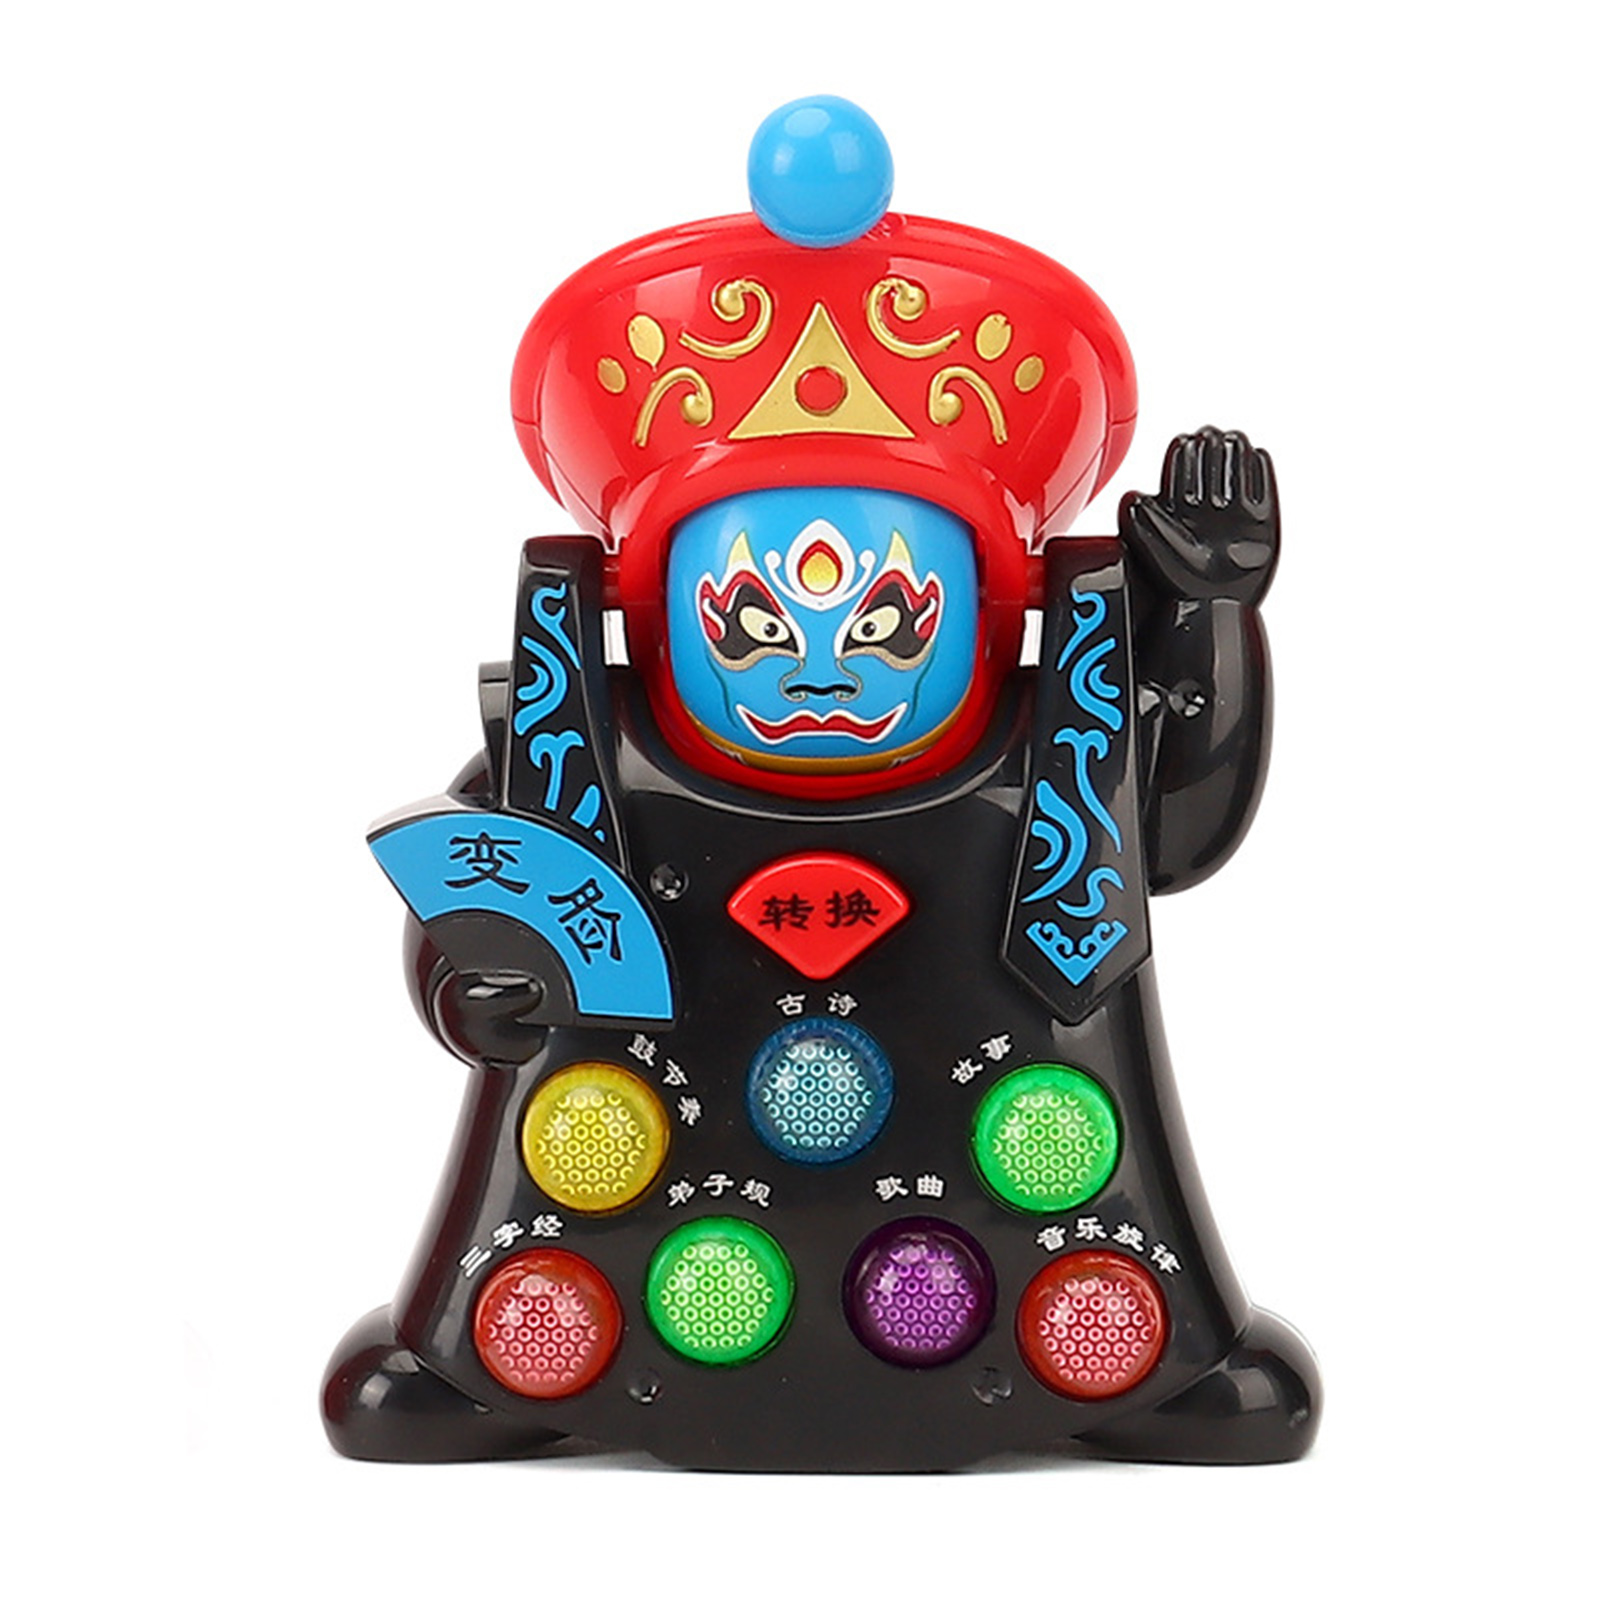 The Pisciculture Sichuan Opera Face Changing Toy Early Education Face